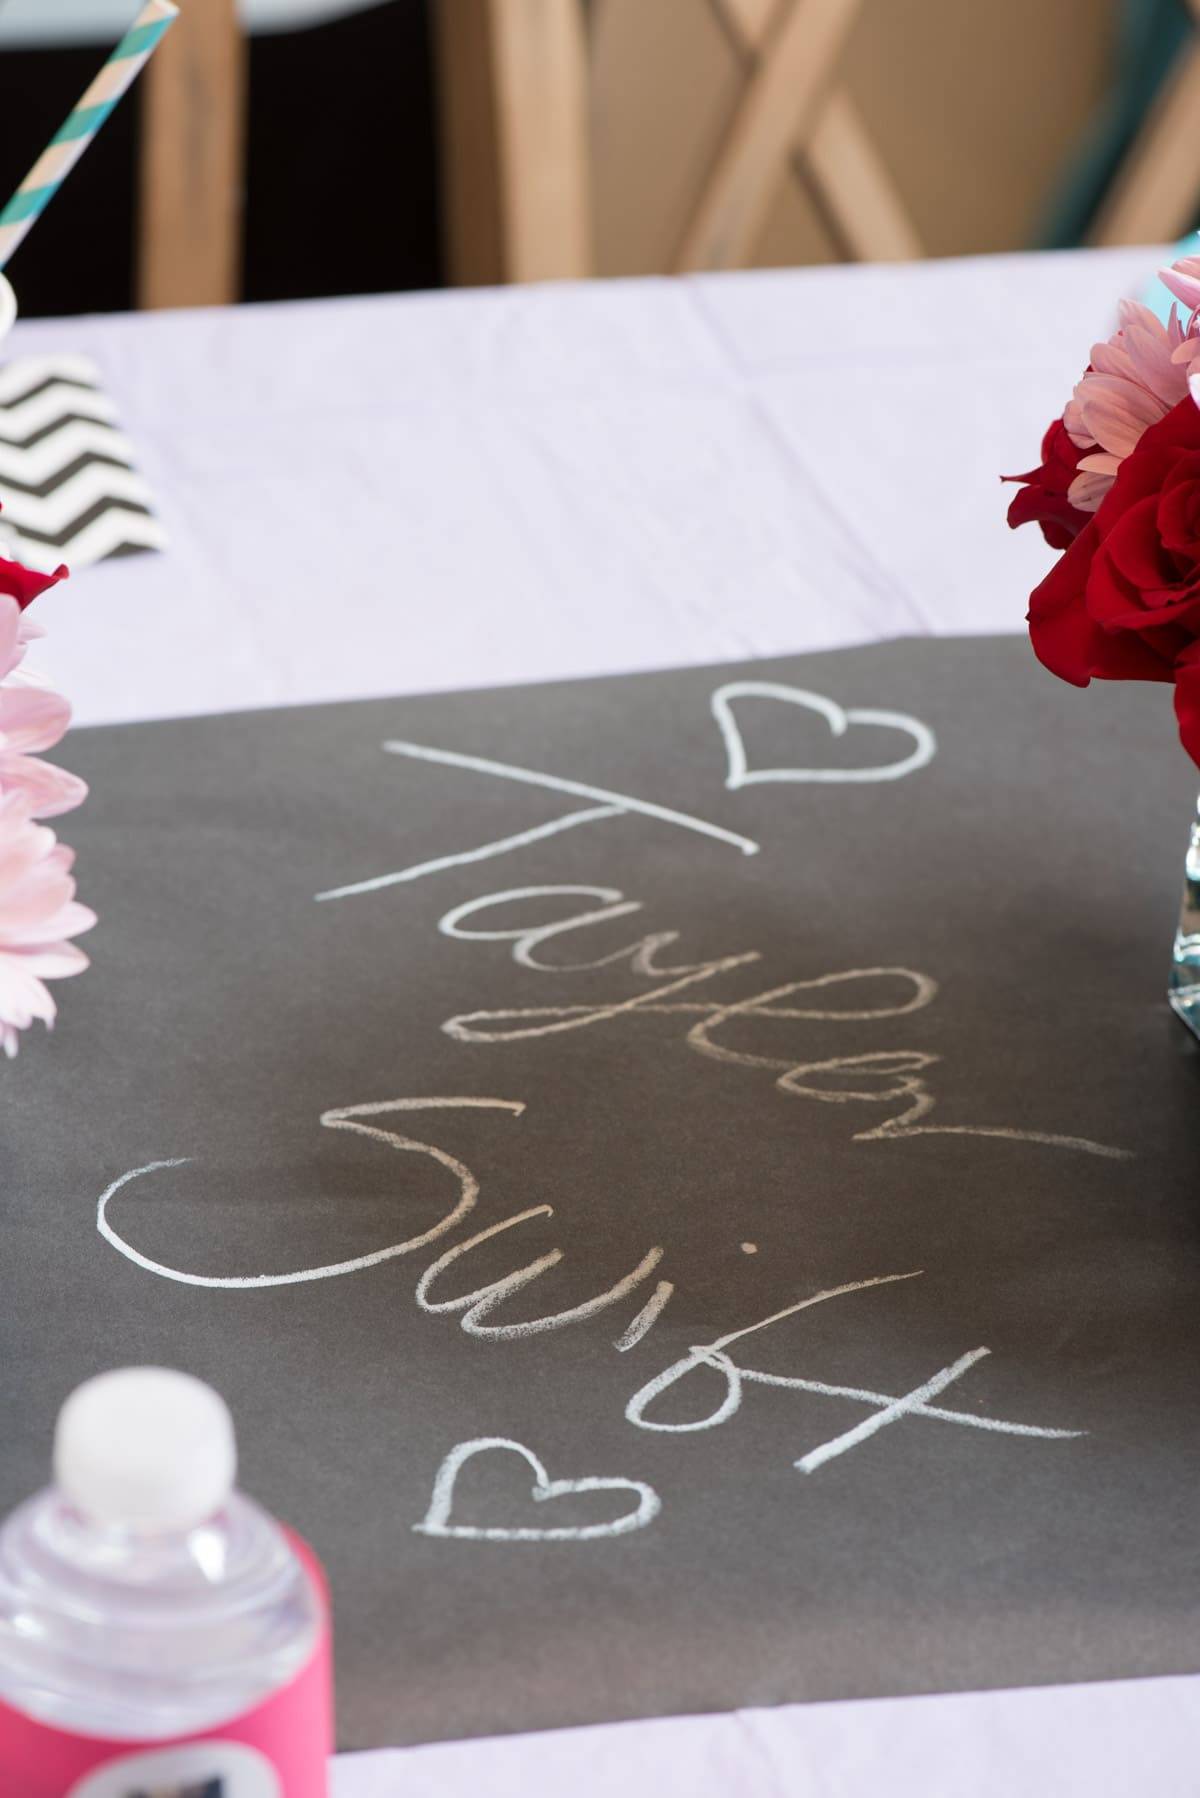 10 Tips For Throwing a Memorable Taylor Swift 1989 Themed Party At Home —  Smartblend